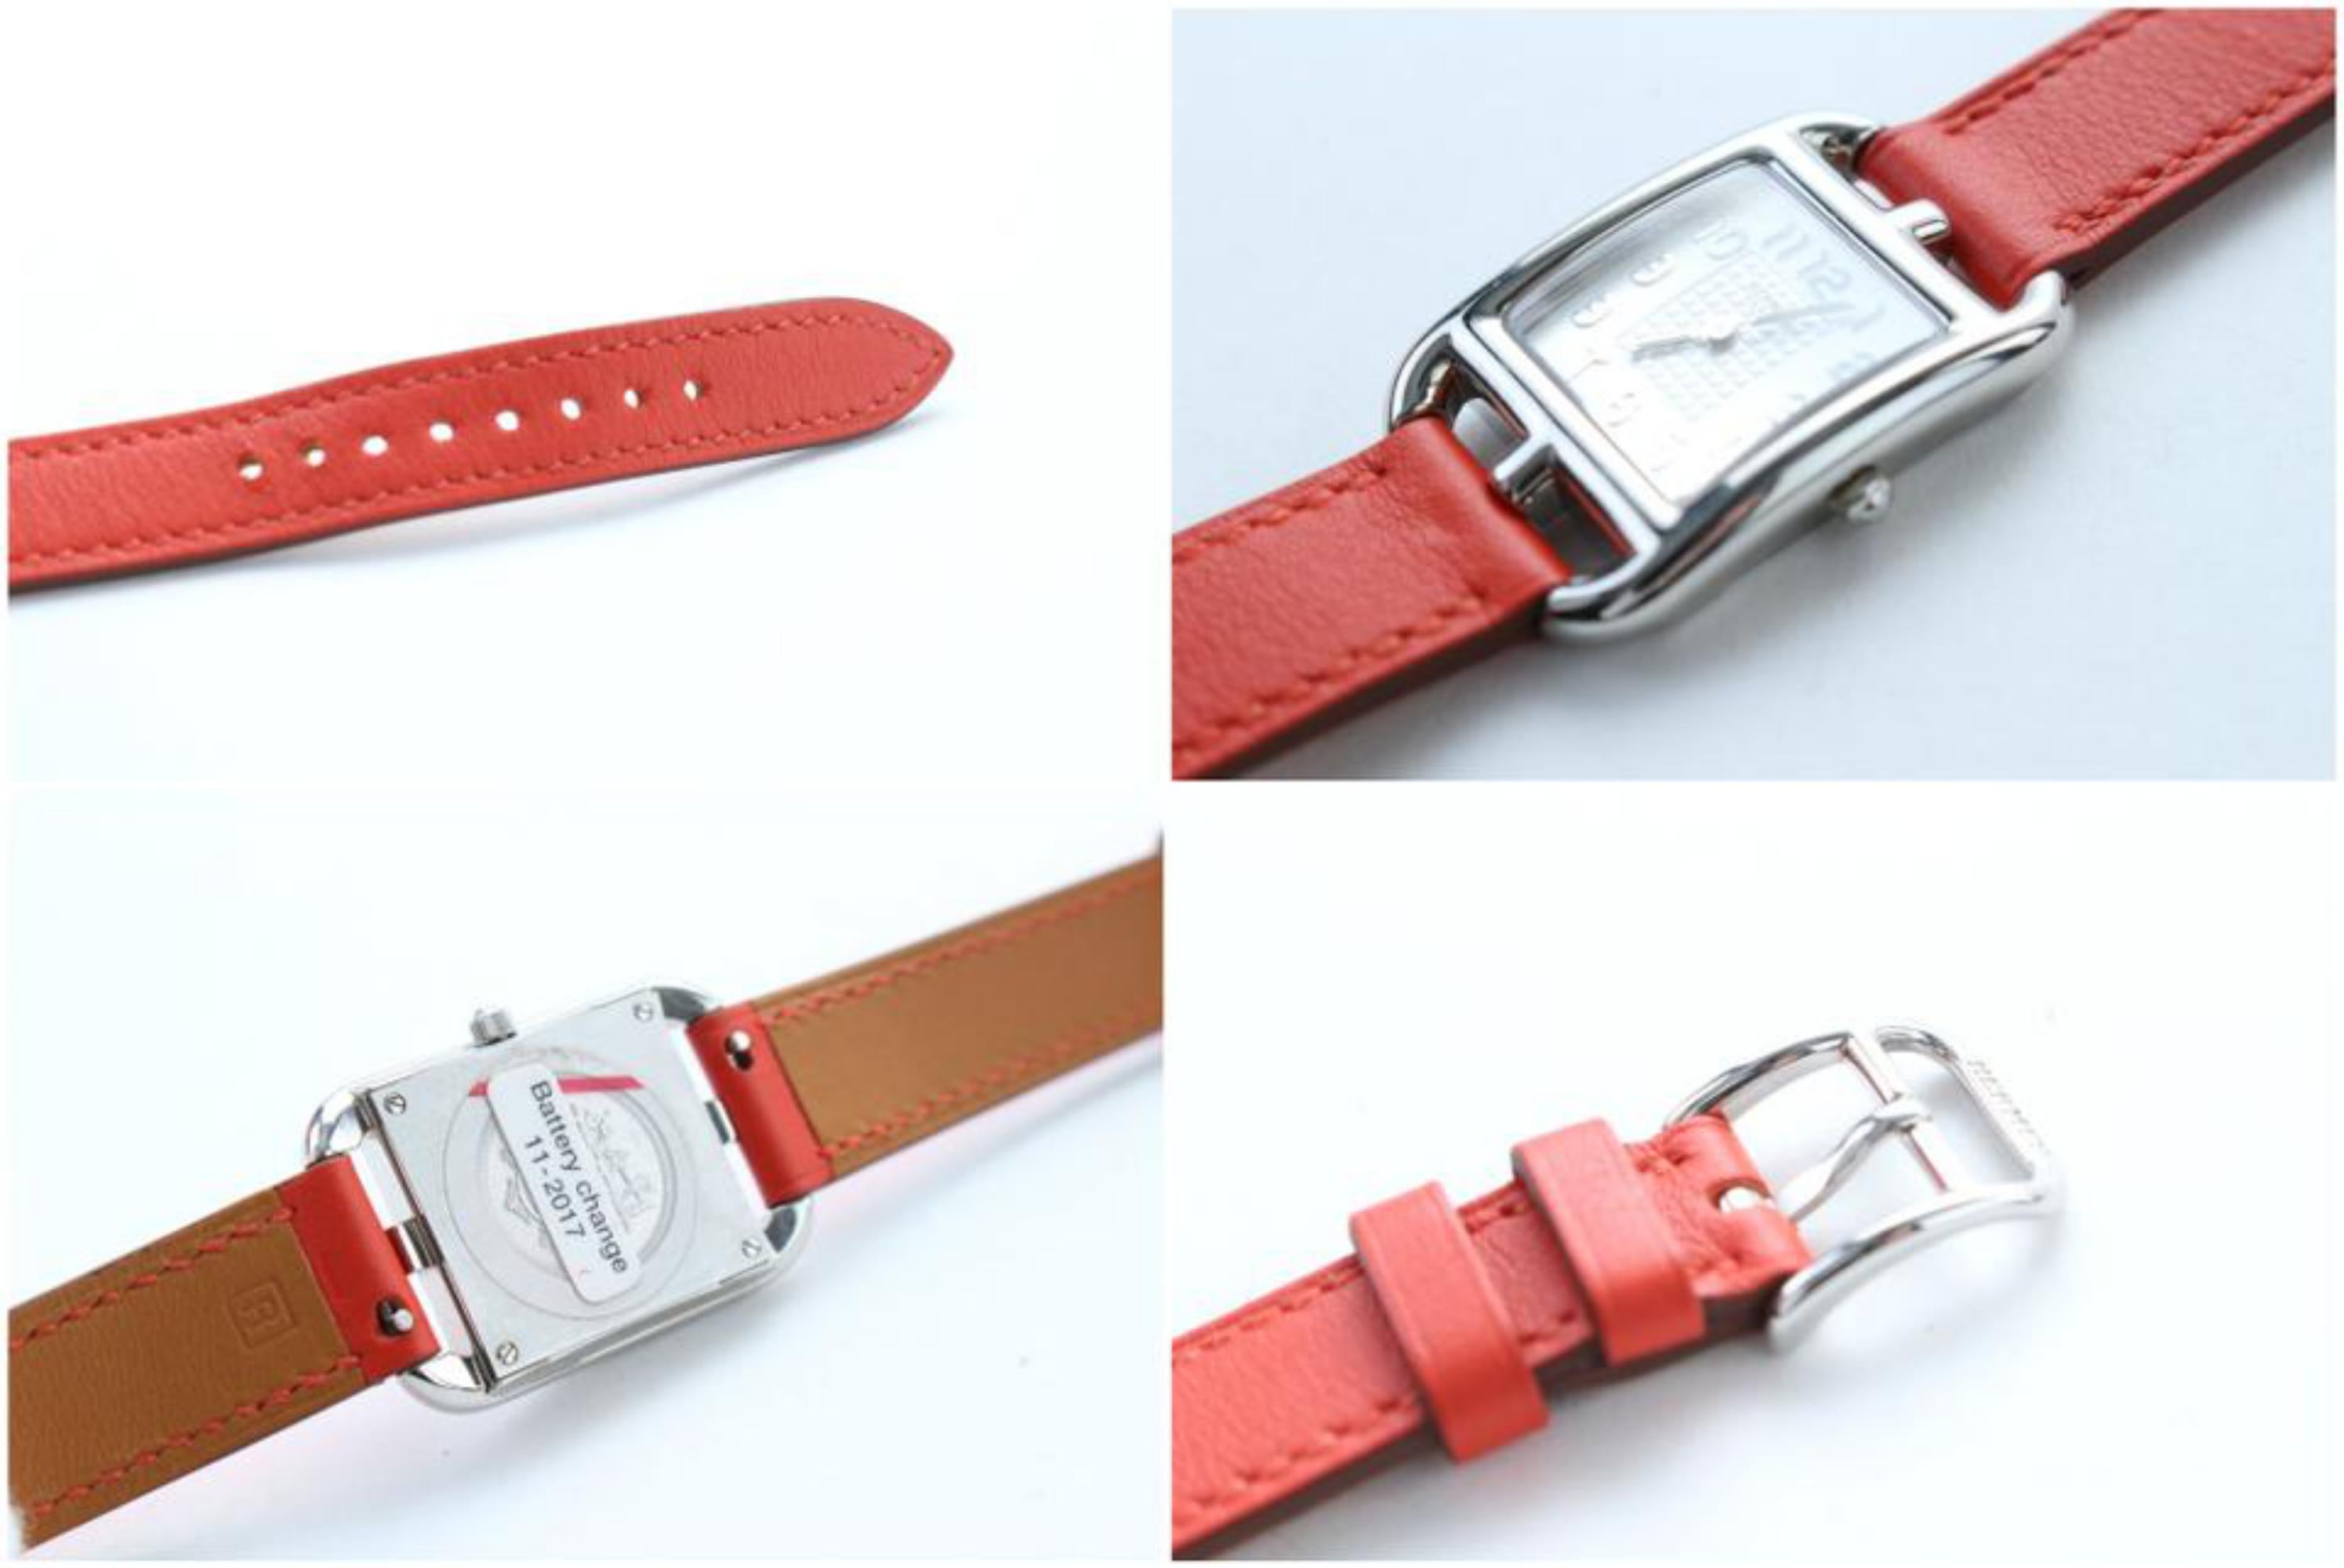 Hermes steel watch, 23 x 23 mm, opaline silvered dial, quartz movement, long double tour interchangeable smooth red calfskin strap
OVERALL EXCELLENT+/LIKE NEW CONDITION
( 9.5/10 or SA )
Includes Hermes Gift Box
Retail $2975
Signs of Wear: May have